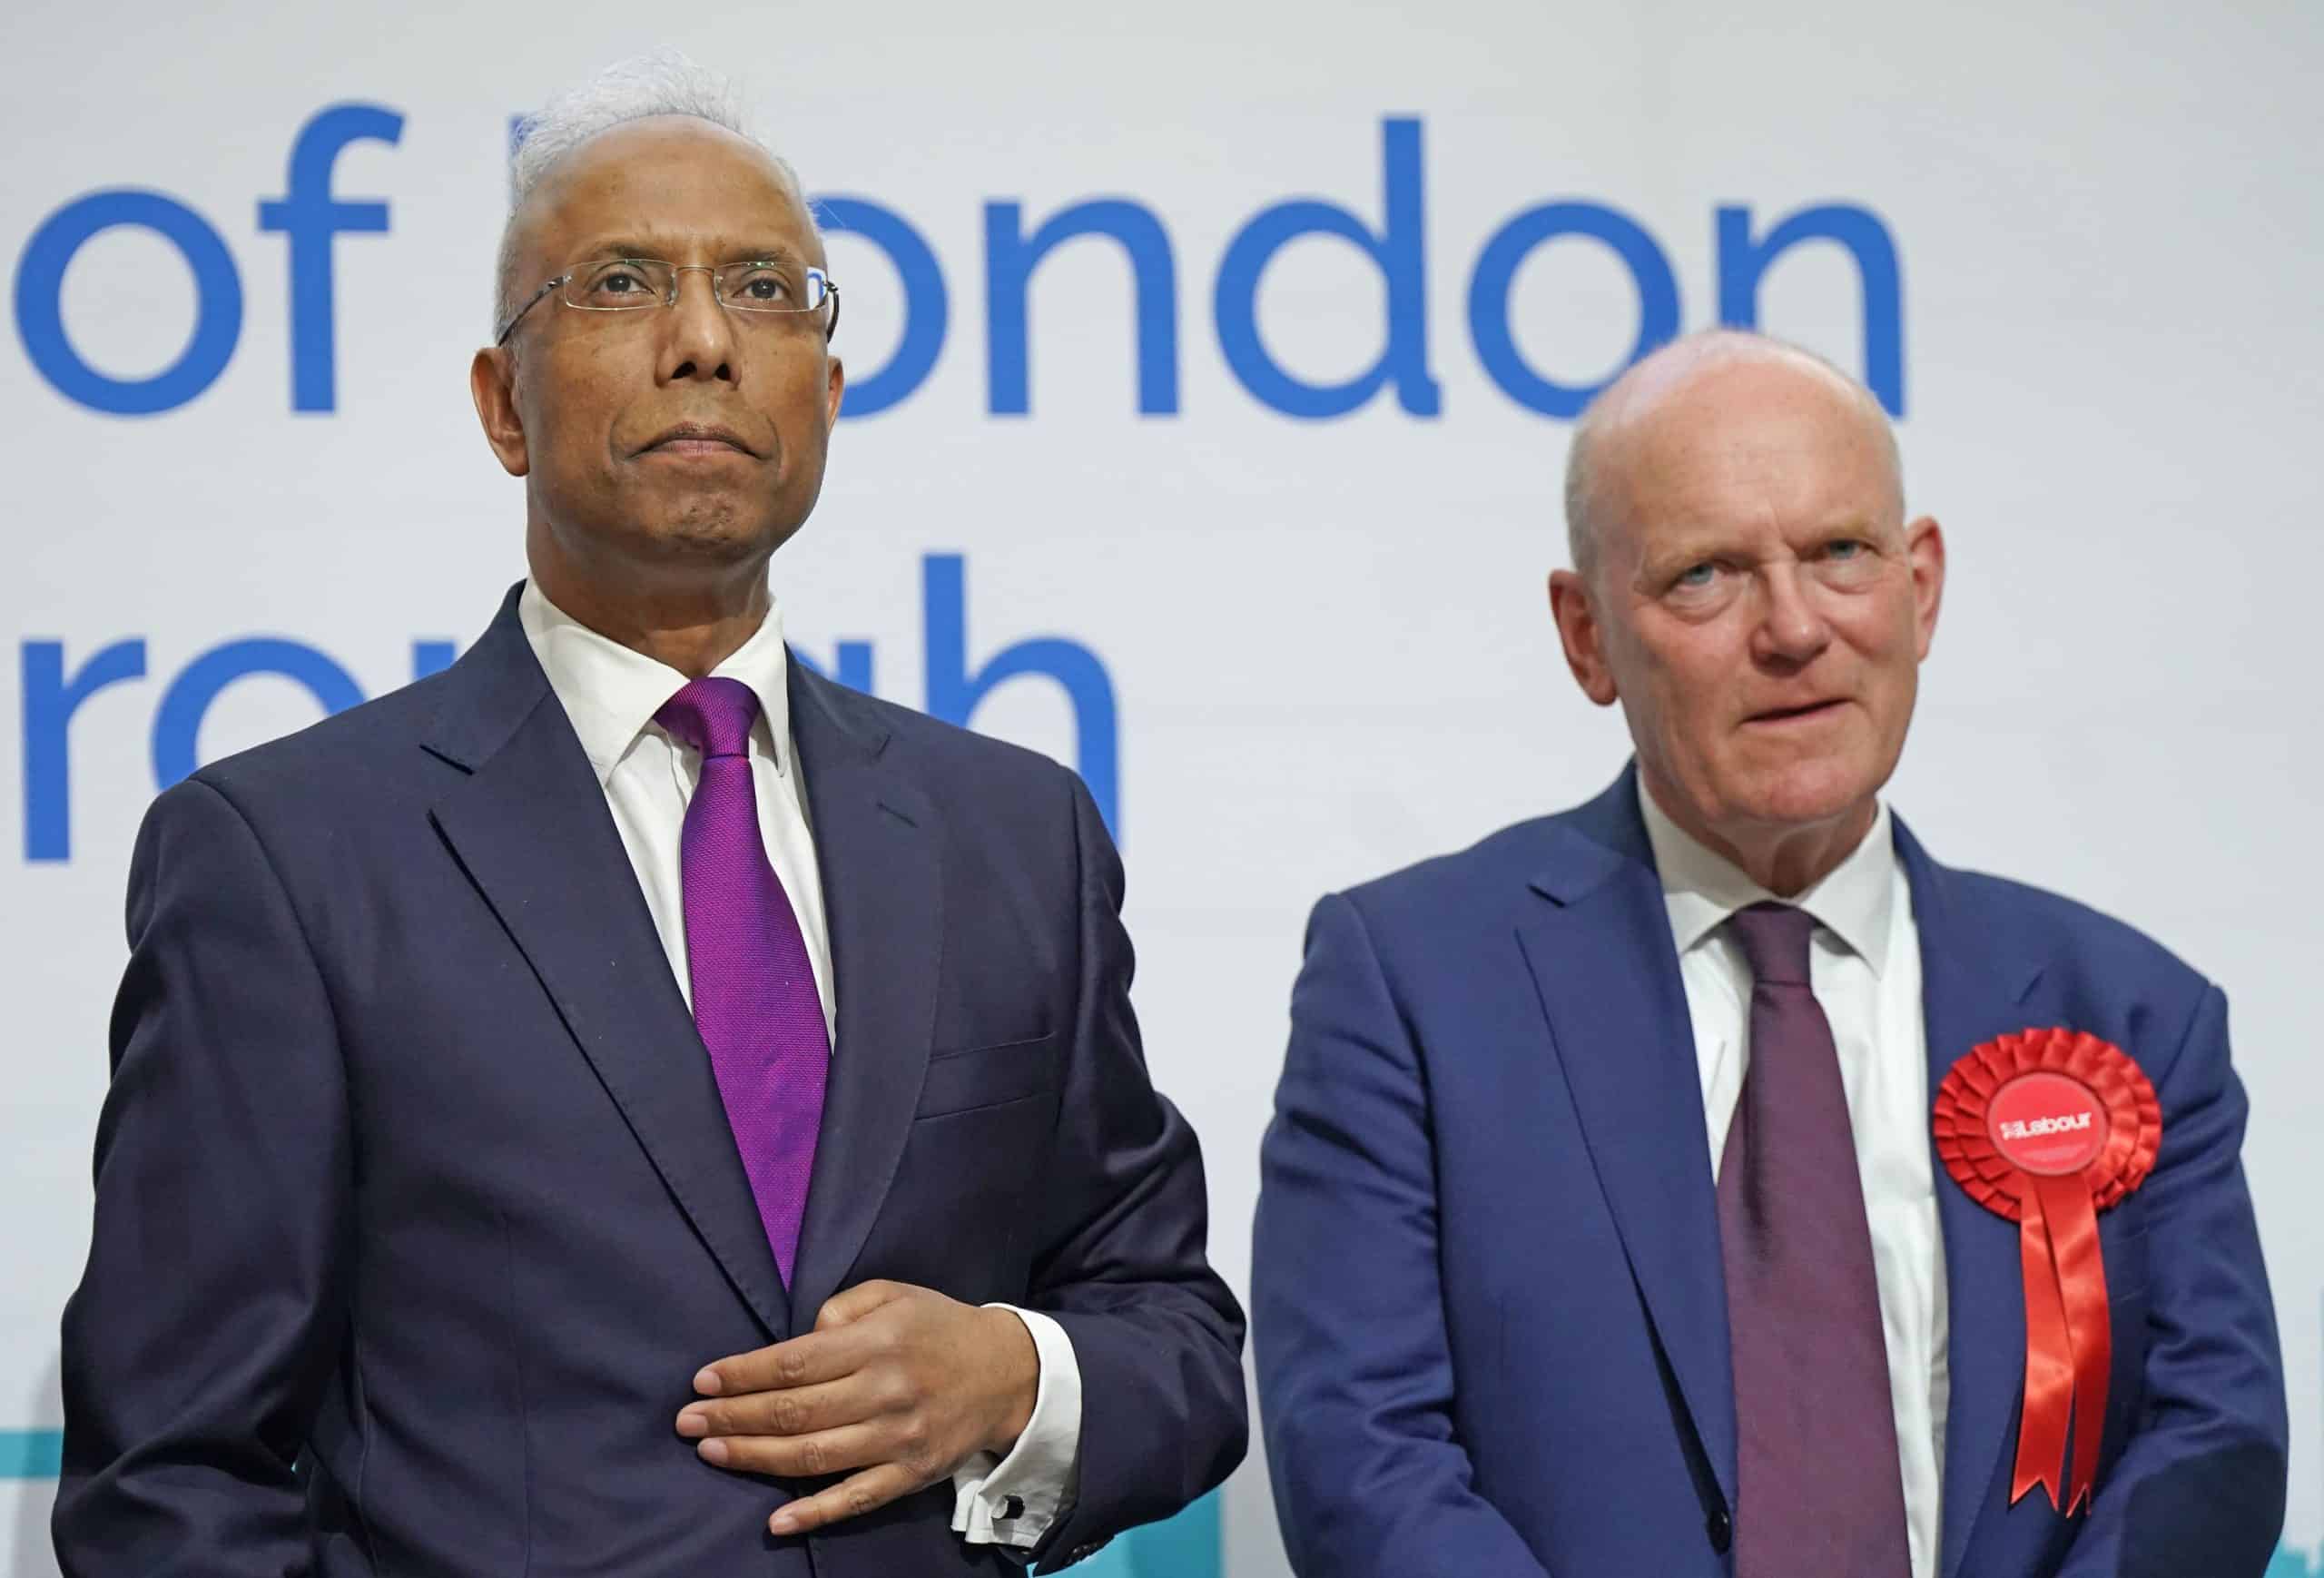 Labour lose Tower Hamlets to controversial Aspire party